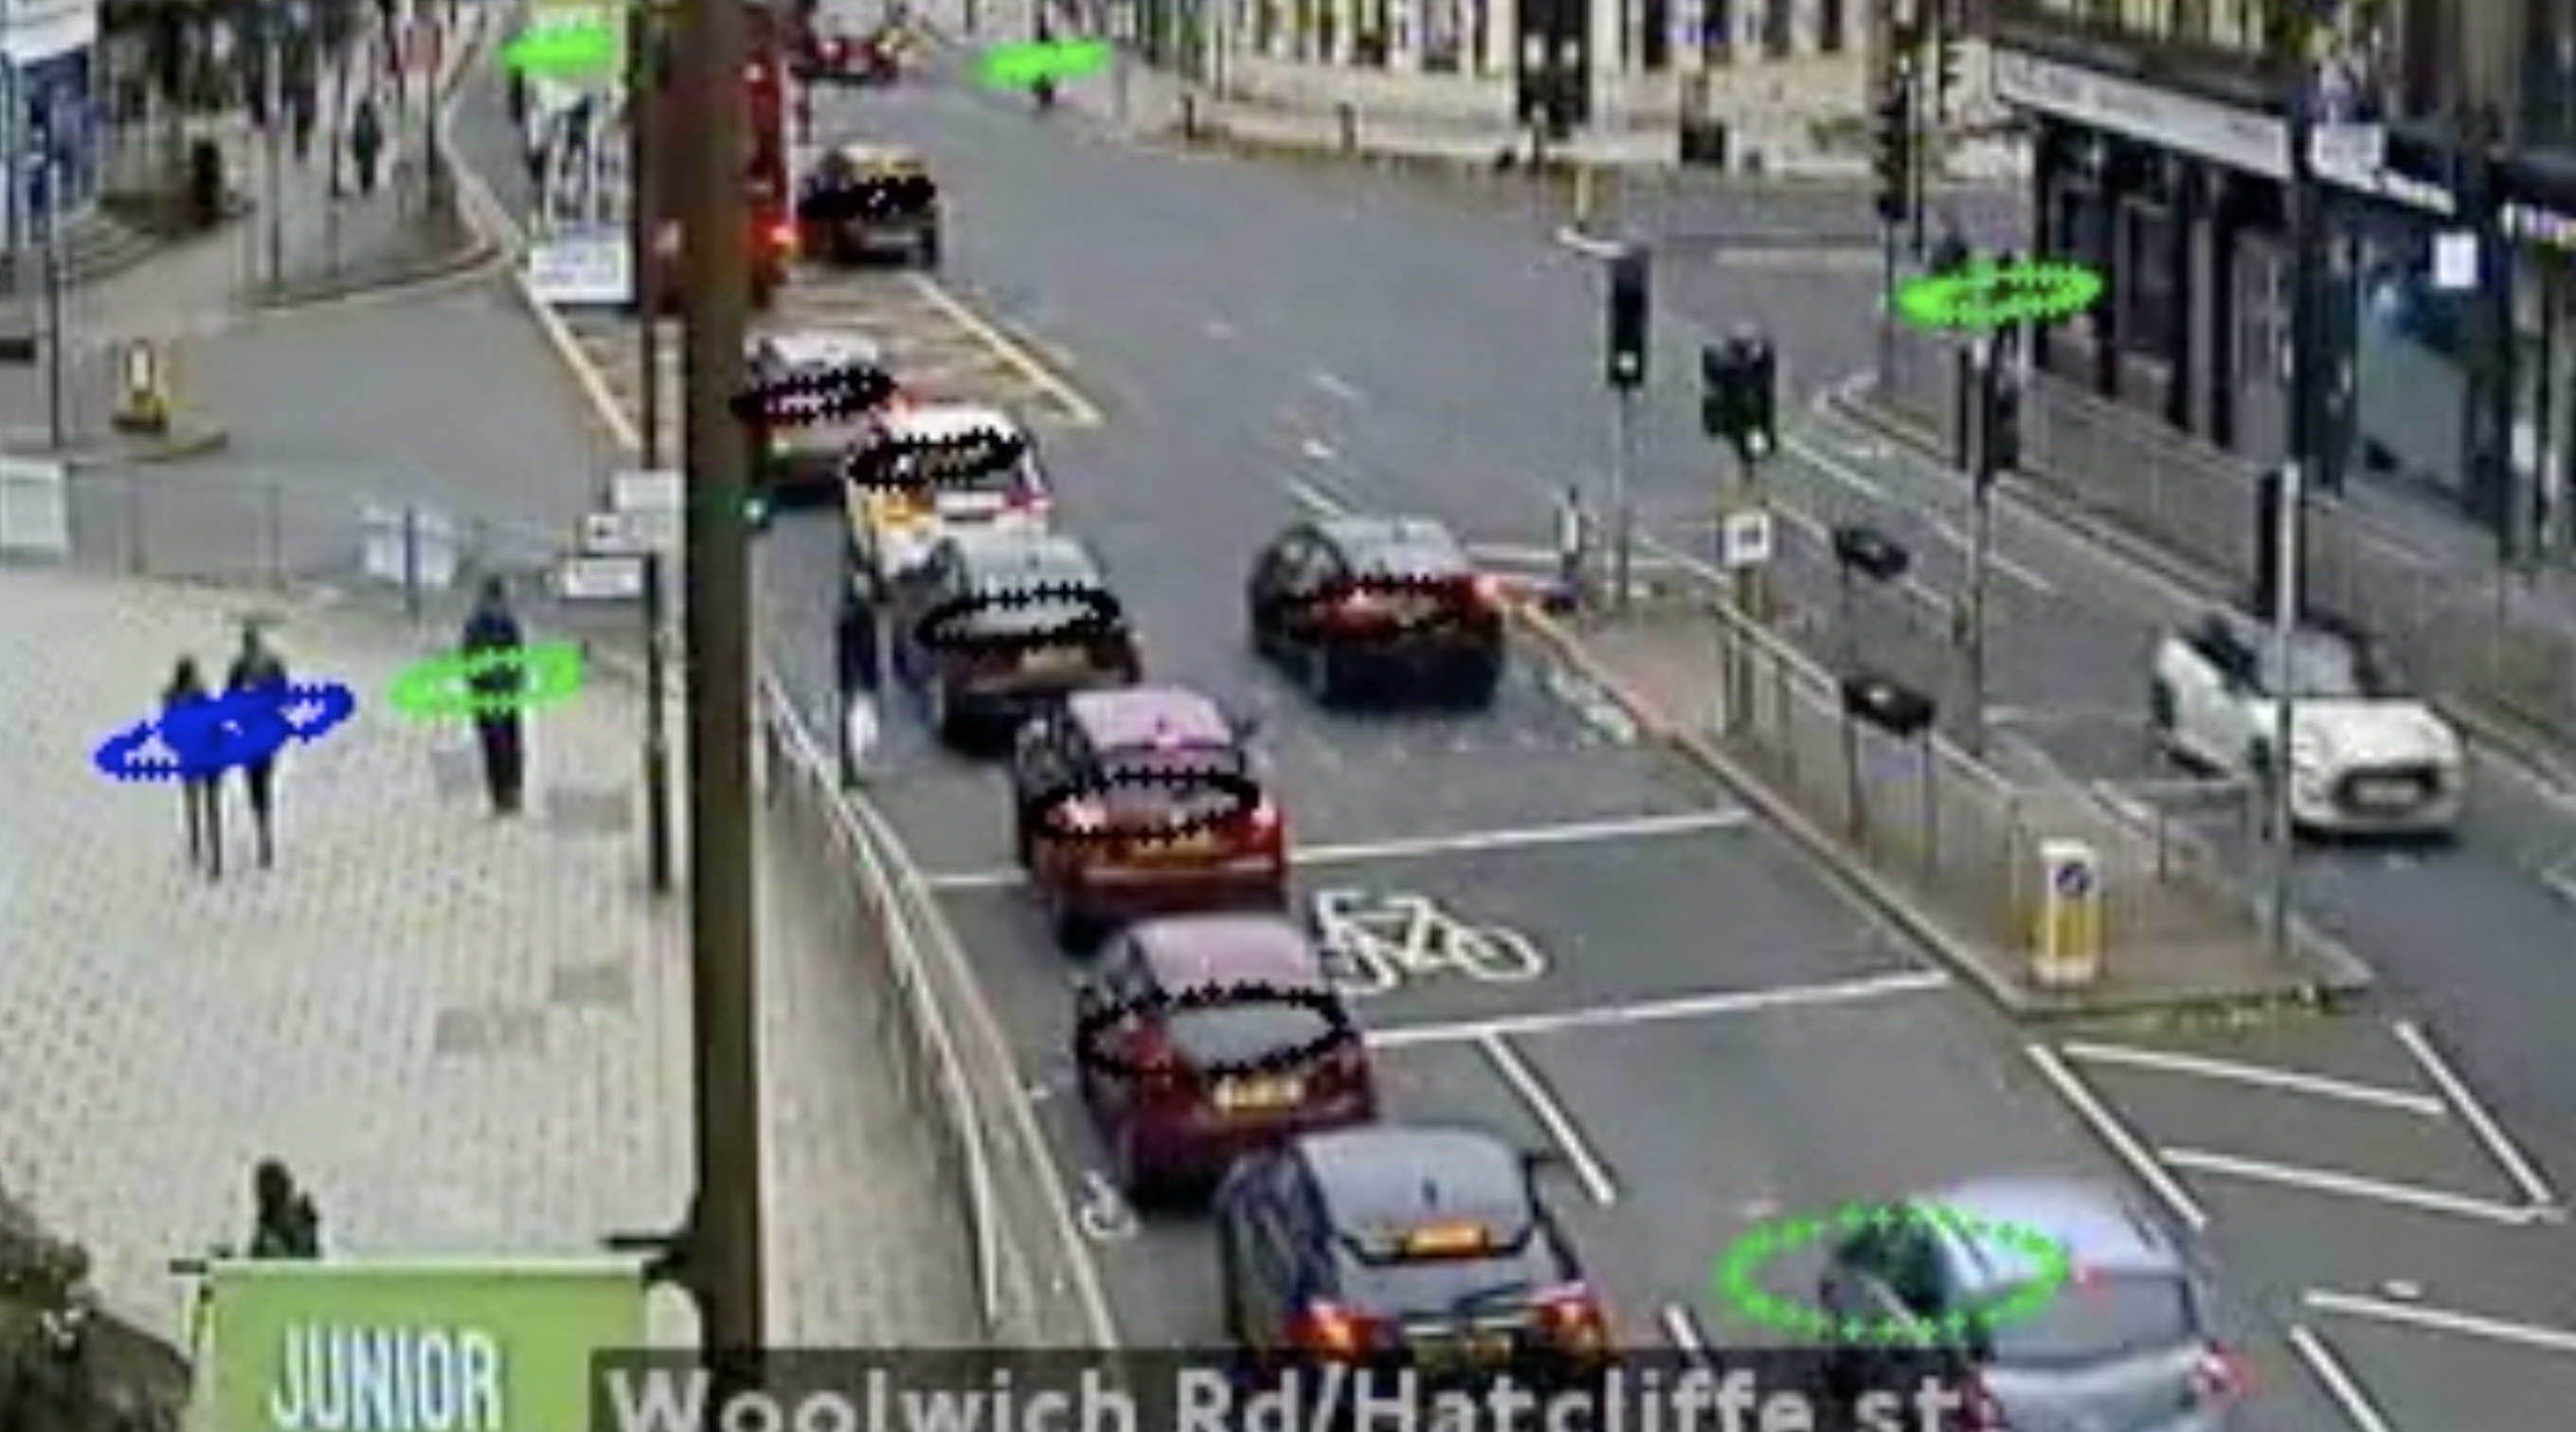 A screenshot of the social distancing tool, with humans ringed by coloured symbols against a London street JamCam image.